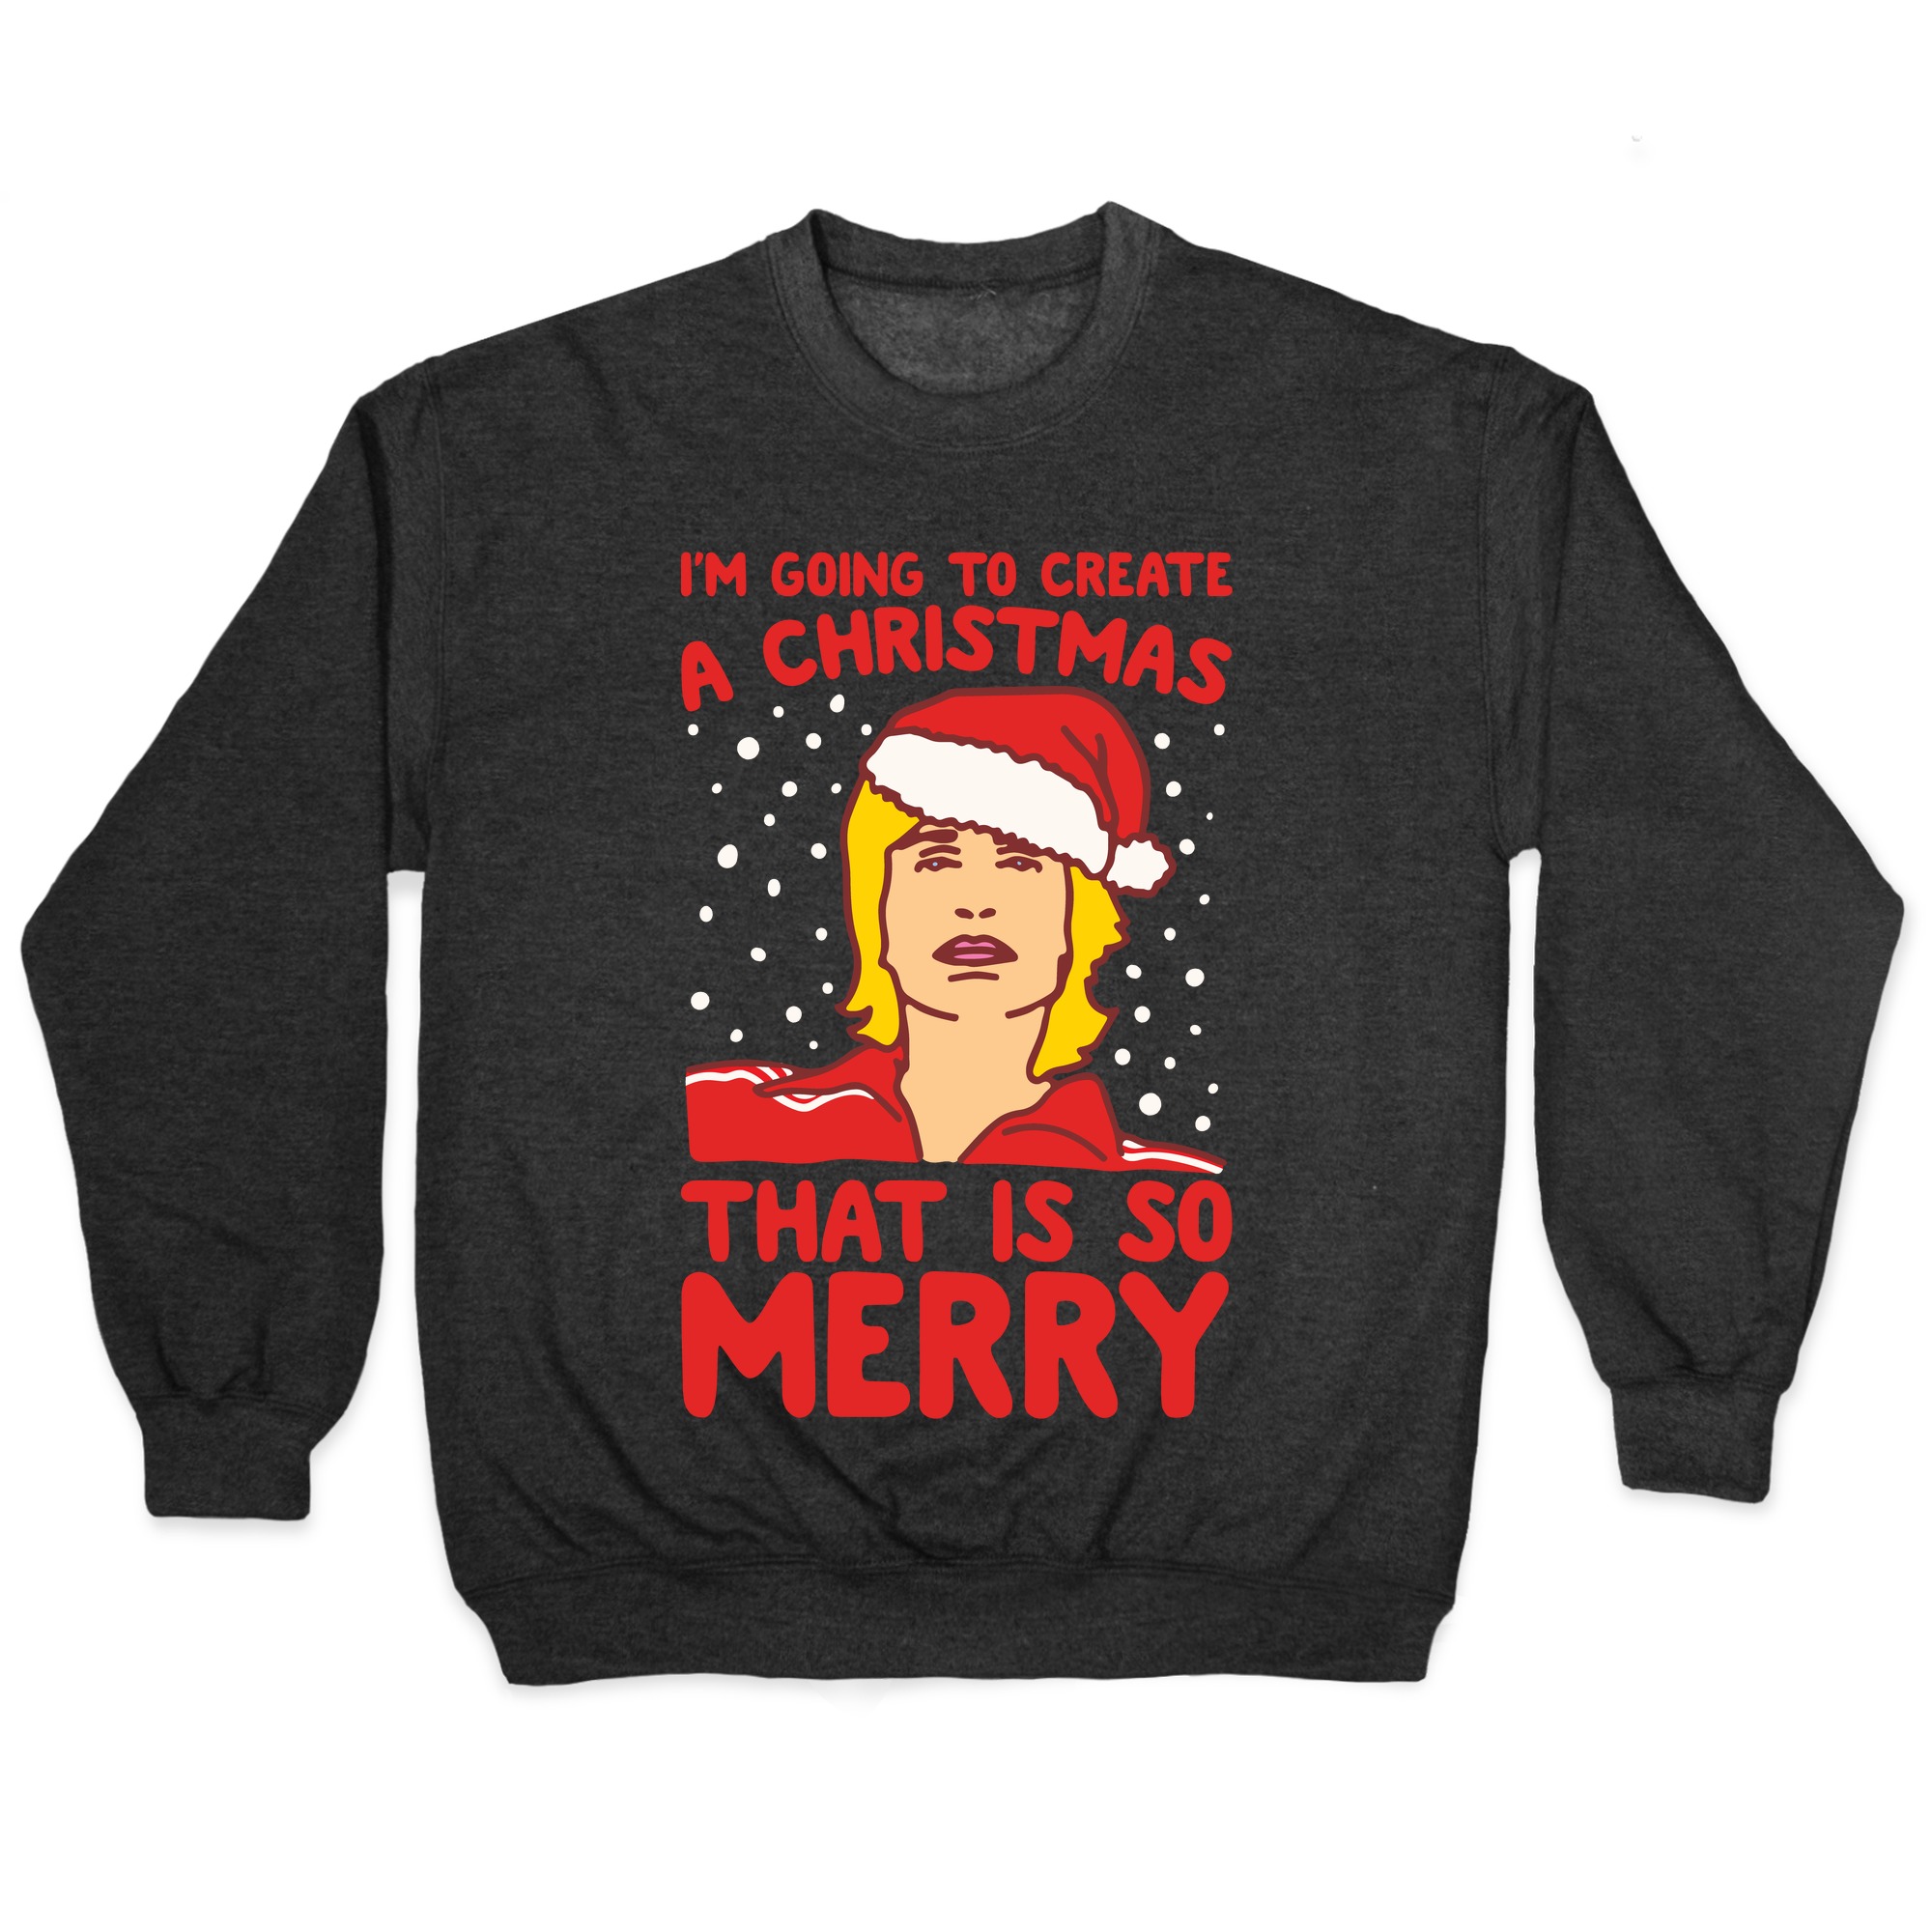 I M Going To Create A Christmas That Is So Merry Parody White Print Pullovers Lookhuman